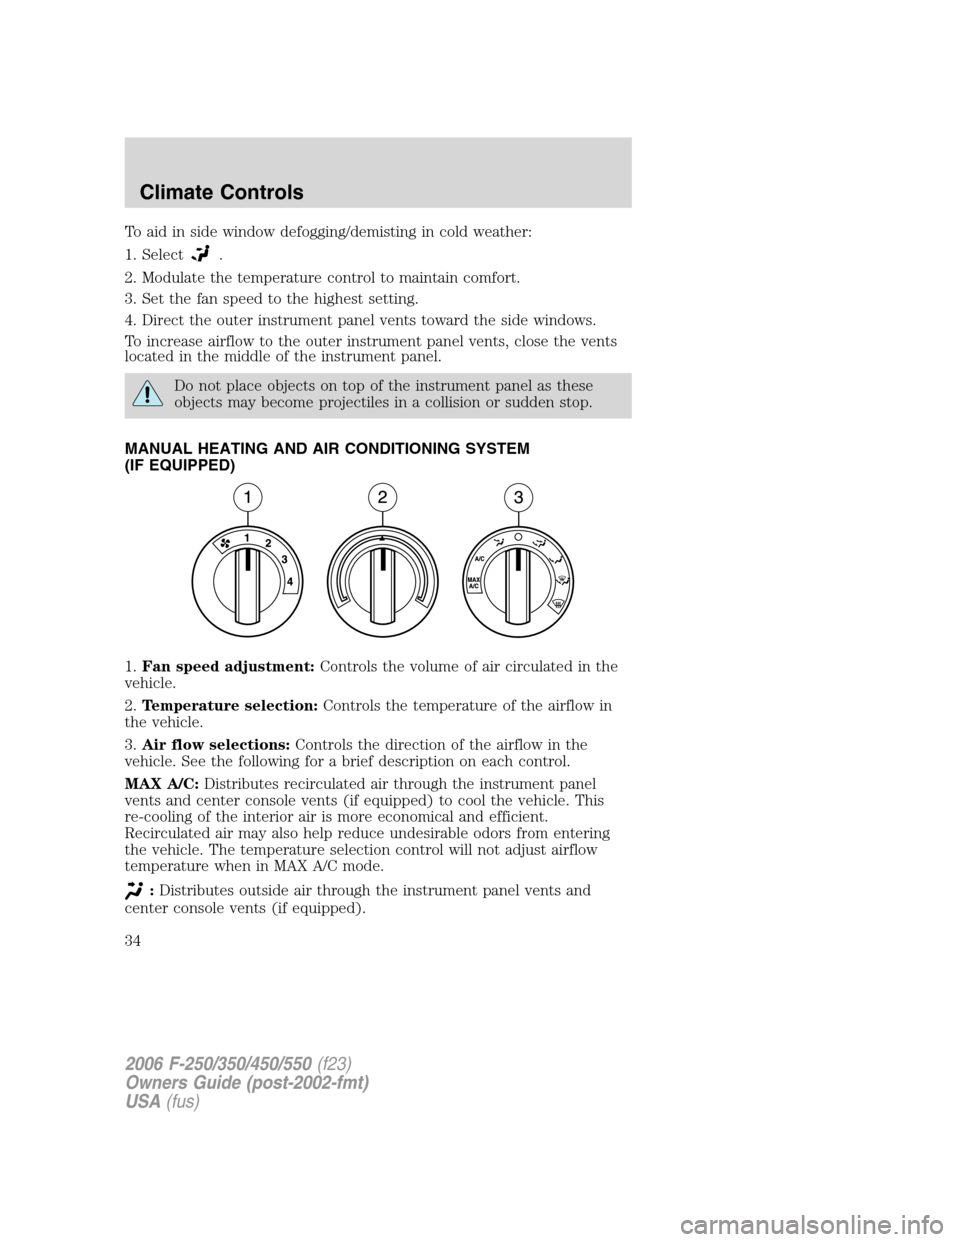 FORD SUPER DUTY 2006 1.G Owners Manual To aid in side window defogging/demisting in cold weather:
1. Select
.
2. Modulate the temperature control to maintain comfort.
3. Set the fan speed to the highest setting.
4. Direct the outer instrum